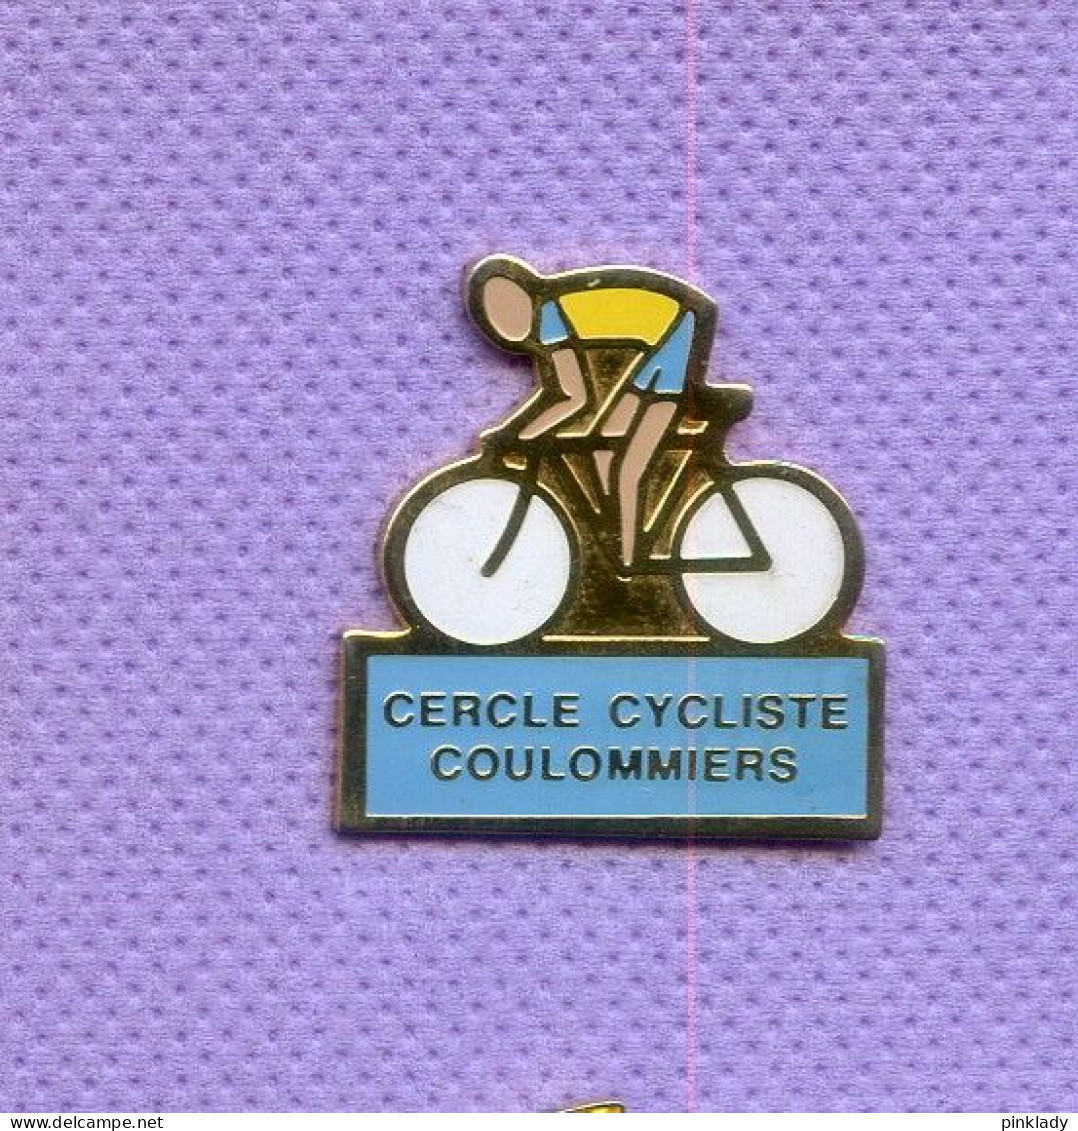 Rare Pins Cyclisme Velo Cercle Cycliste Coulommiers Seine Et Marne 77 I330 - Radsport